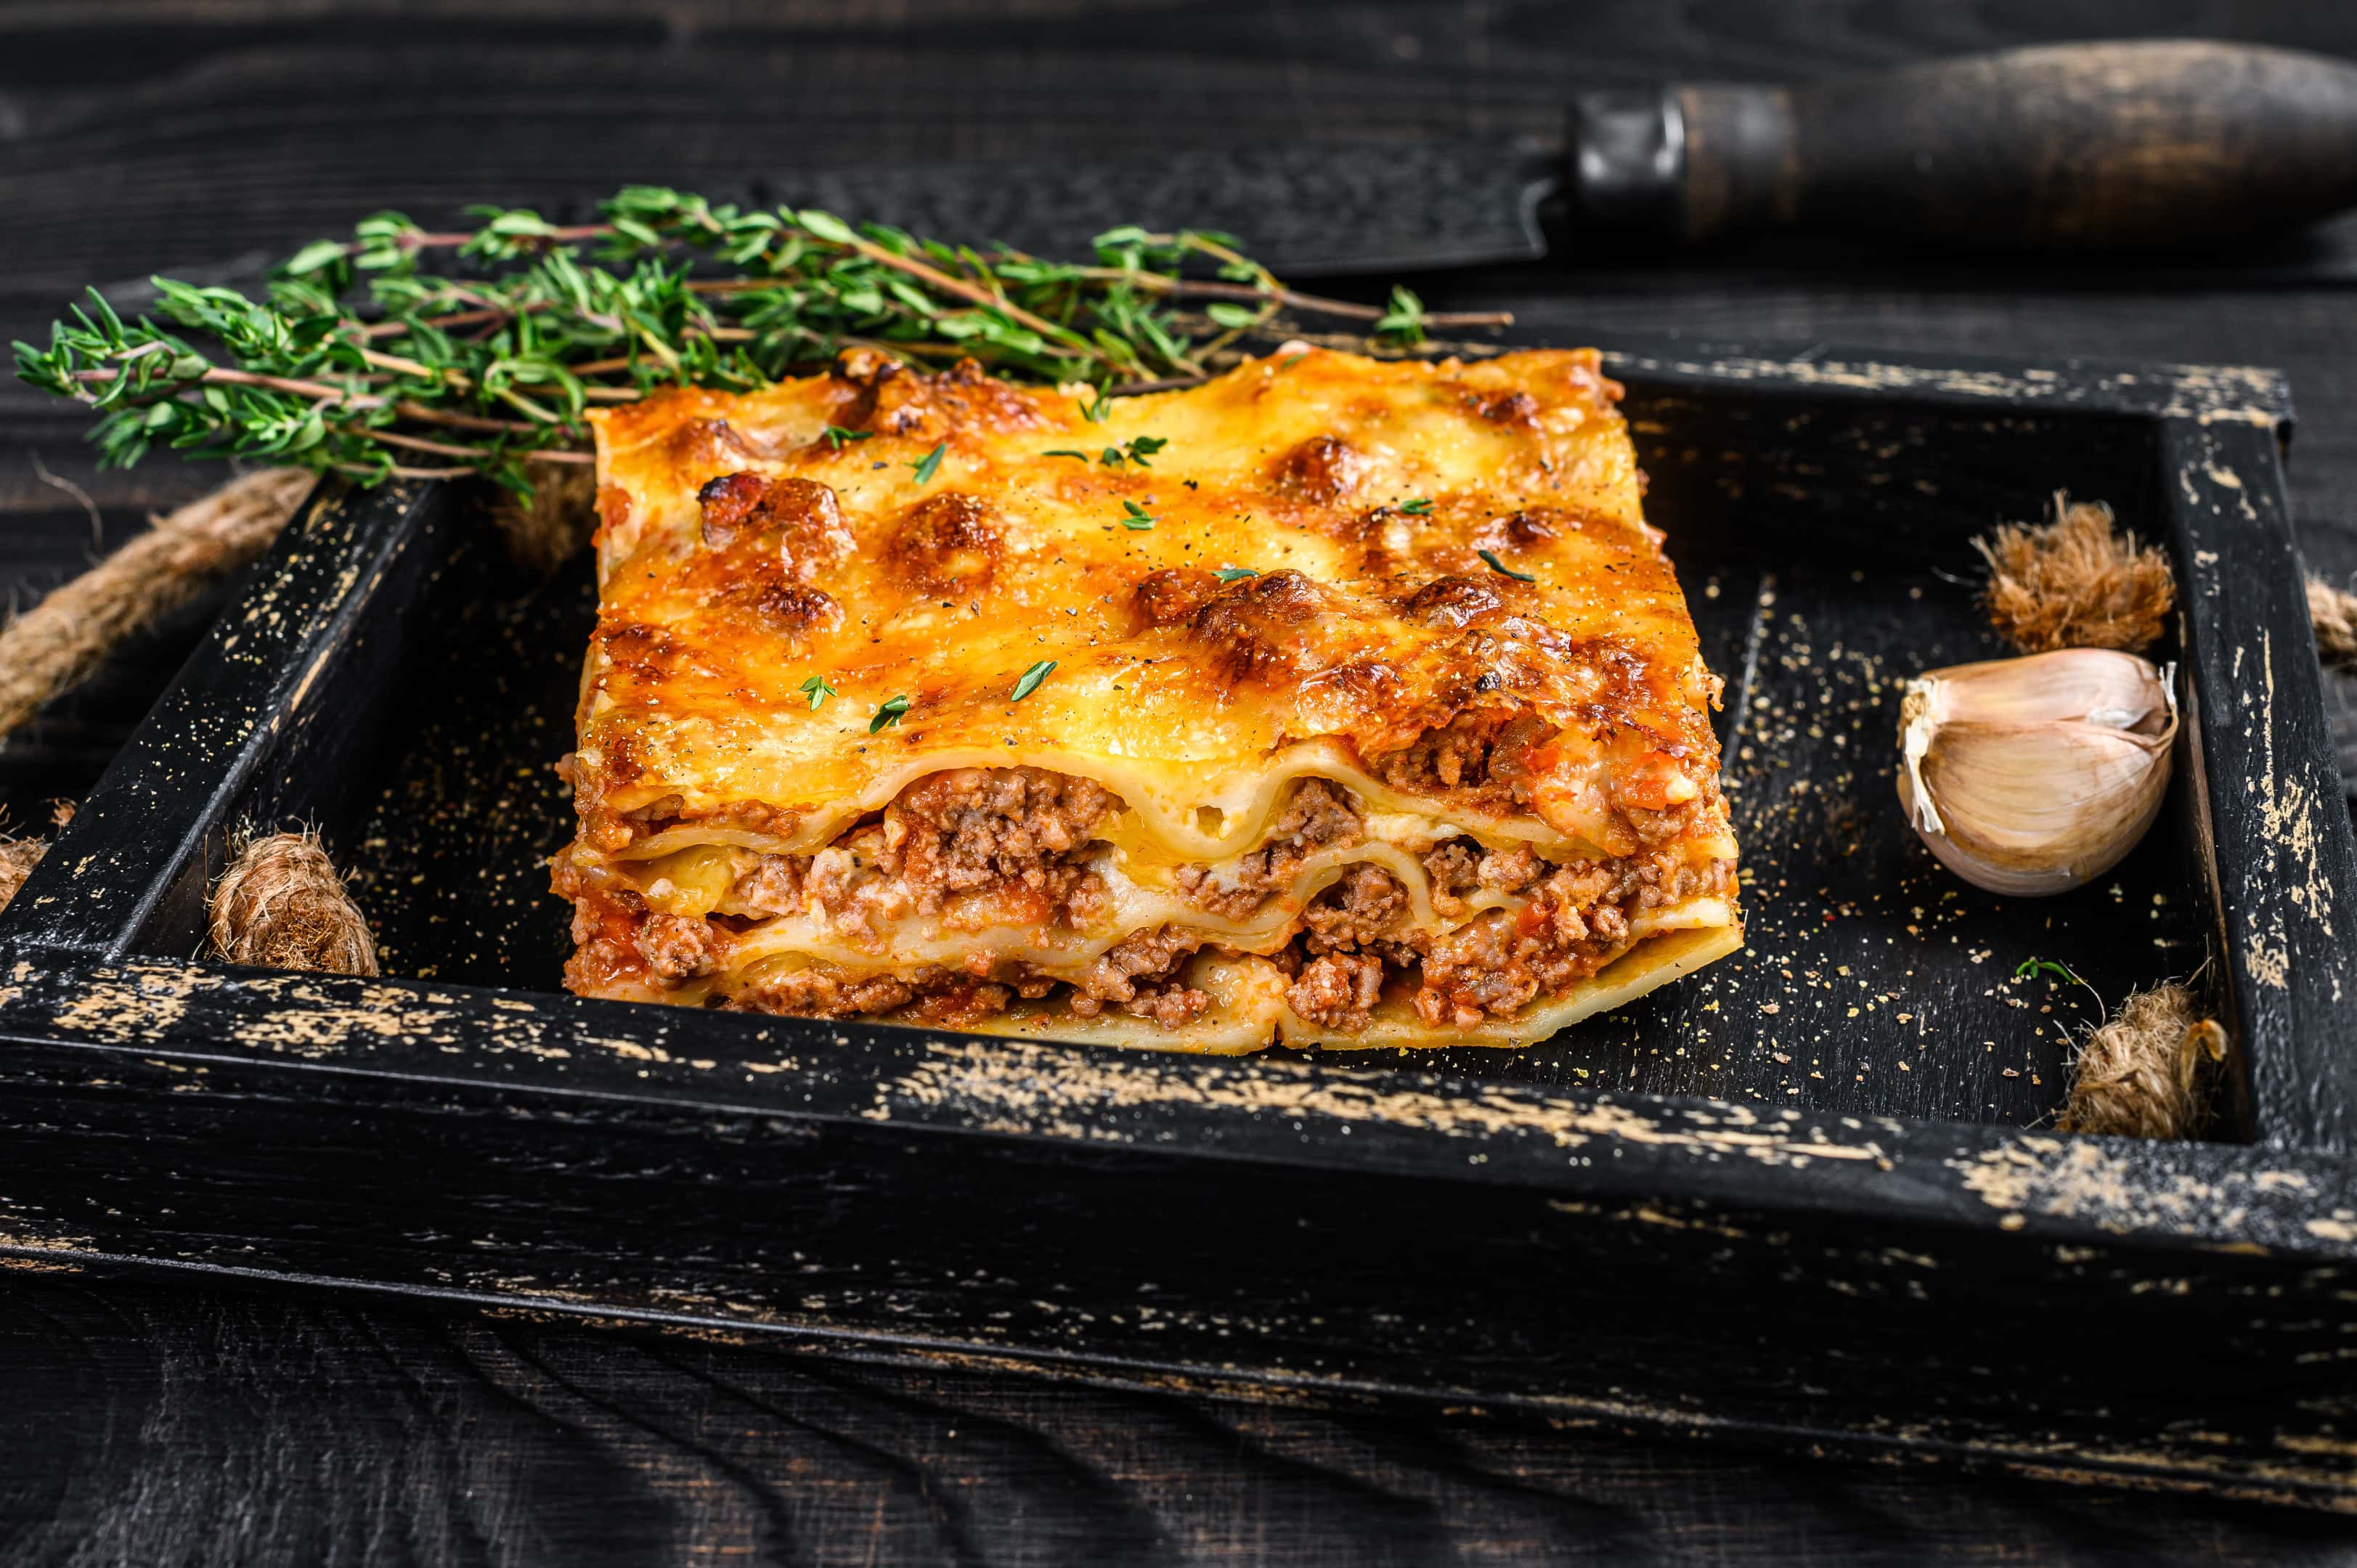 Portion of lasagna with mince beef and Bolognese sauce